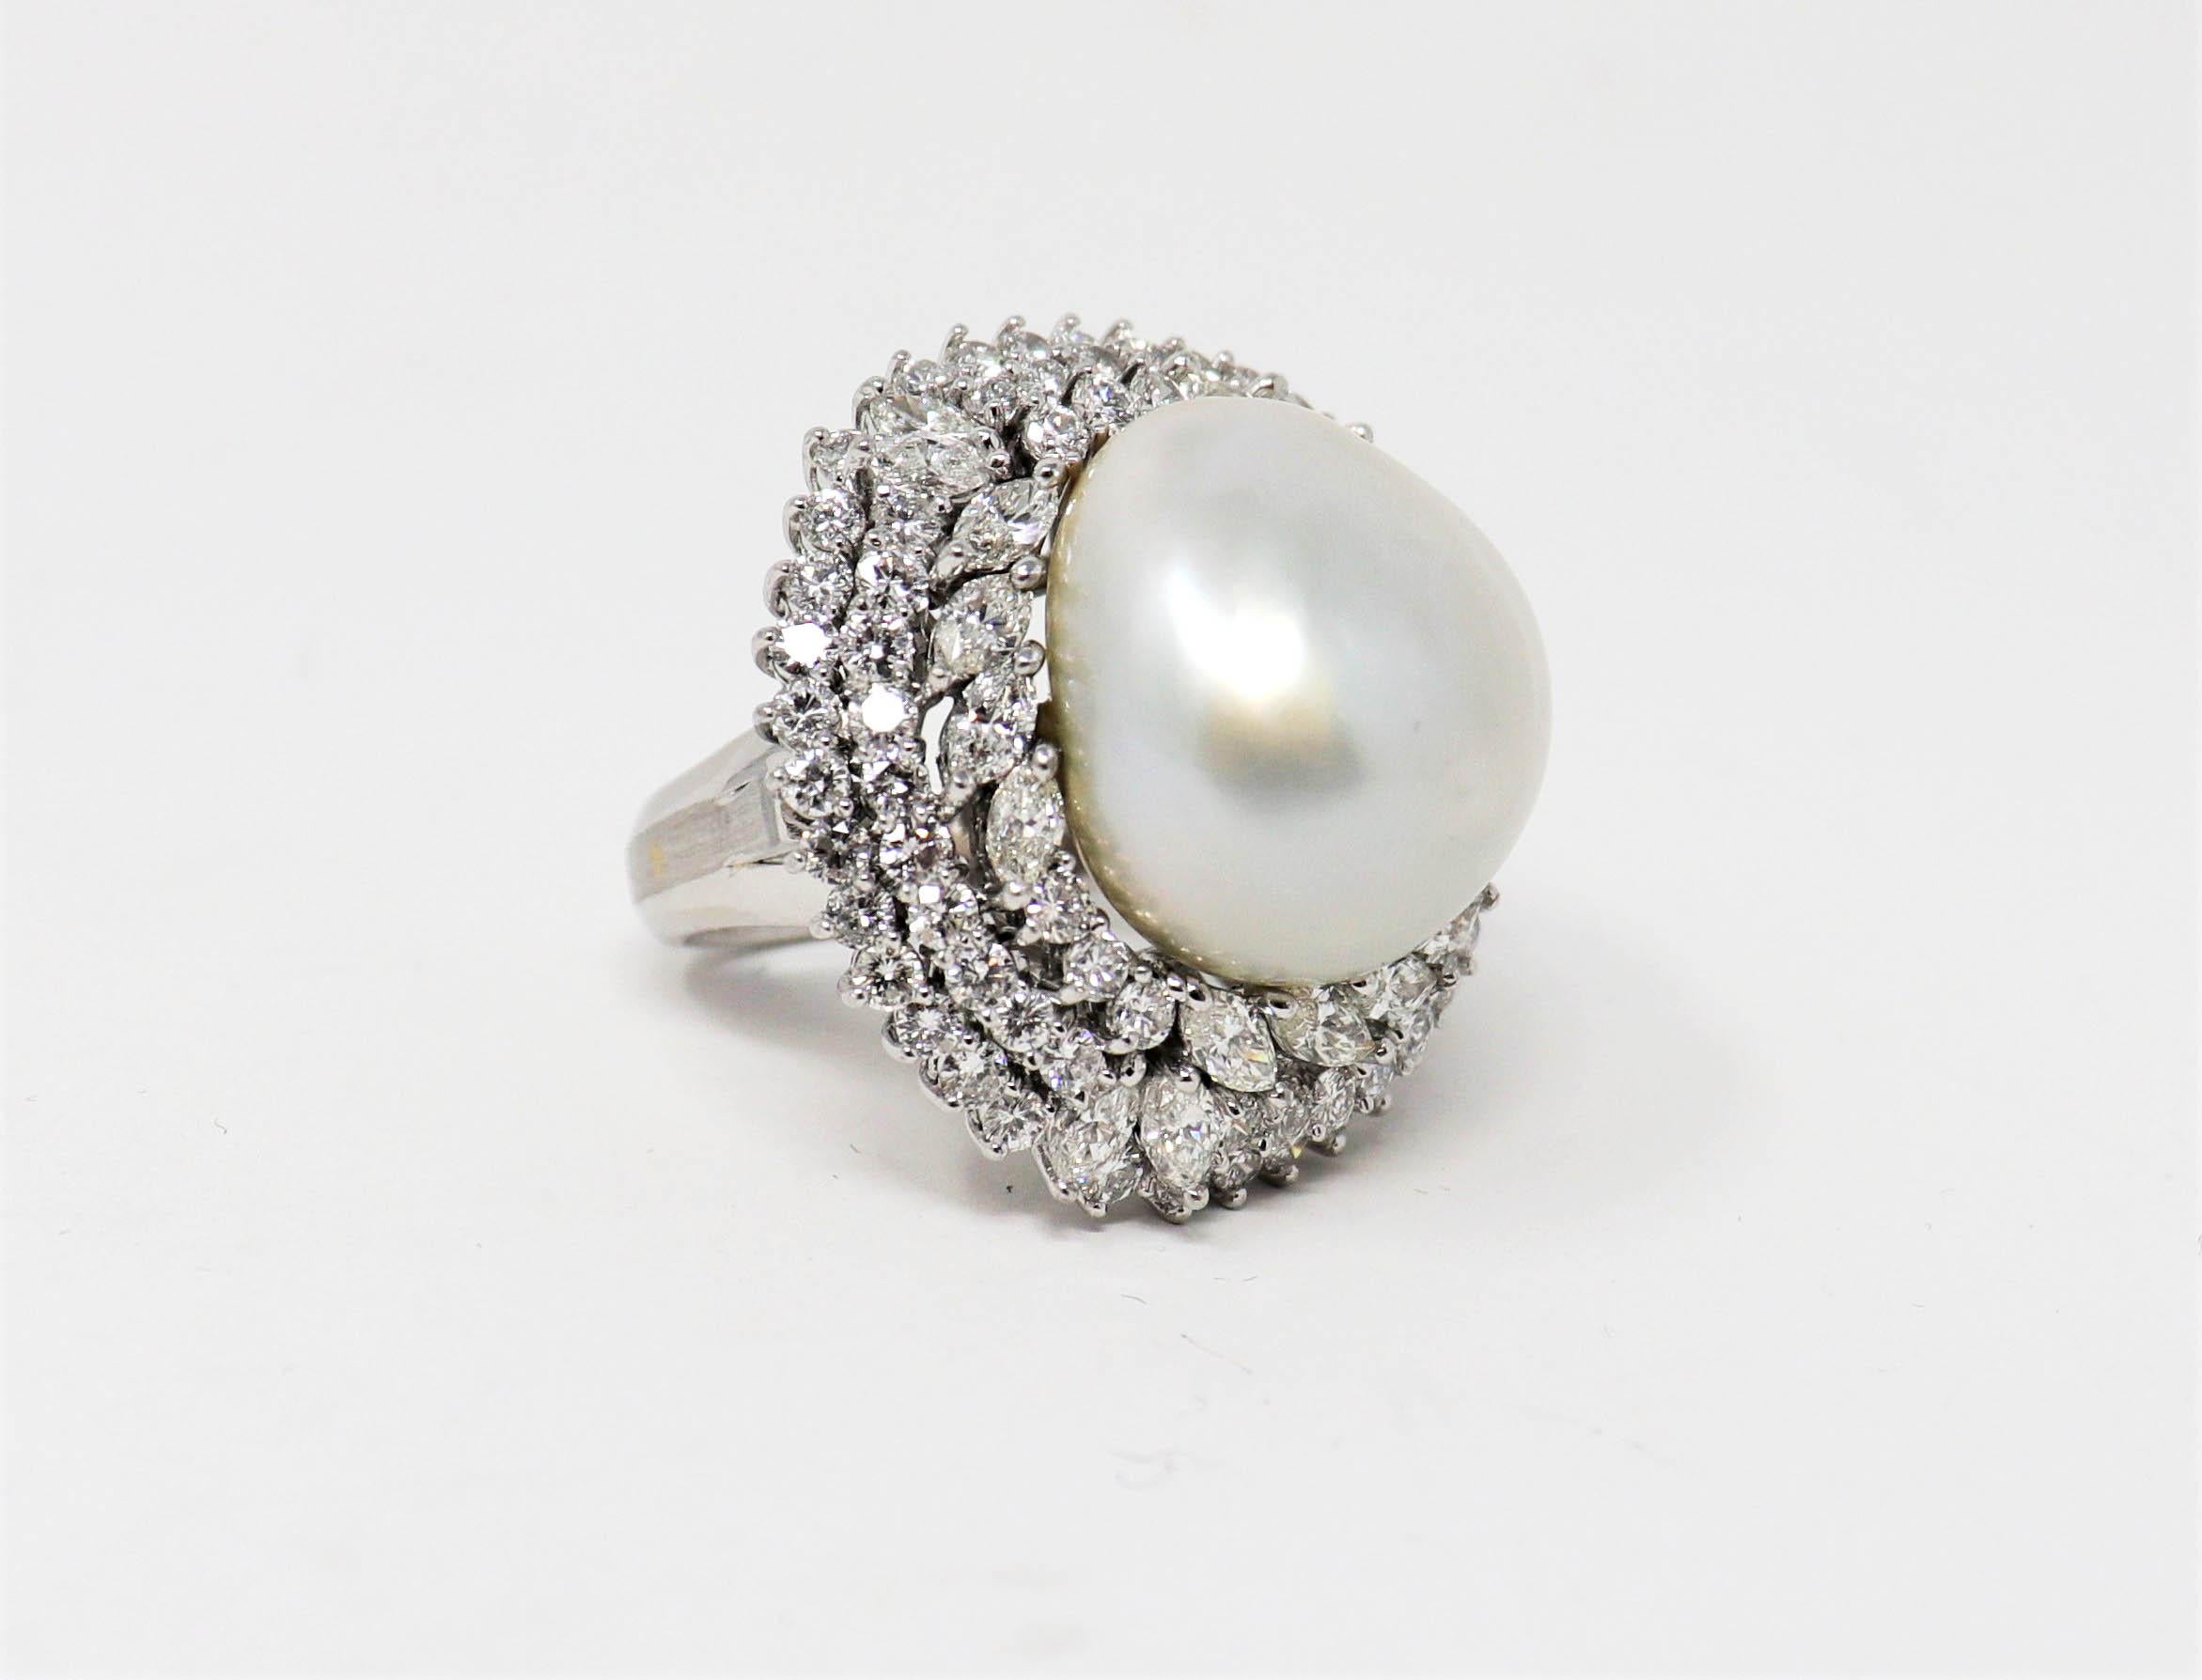 Ring size: 7.5

Breathtaking diamond and pearl ballerina cocktail ring with incredible fine details. Shimmering diamonds are set in a triple halo design and surround a large round mabe pearl, creating a bright and sparkling signature piece. 

This